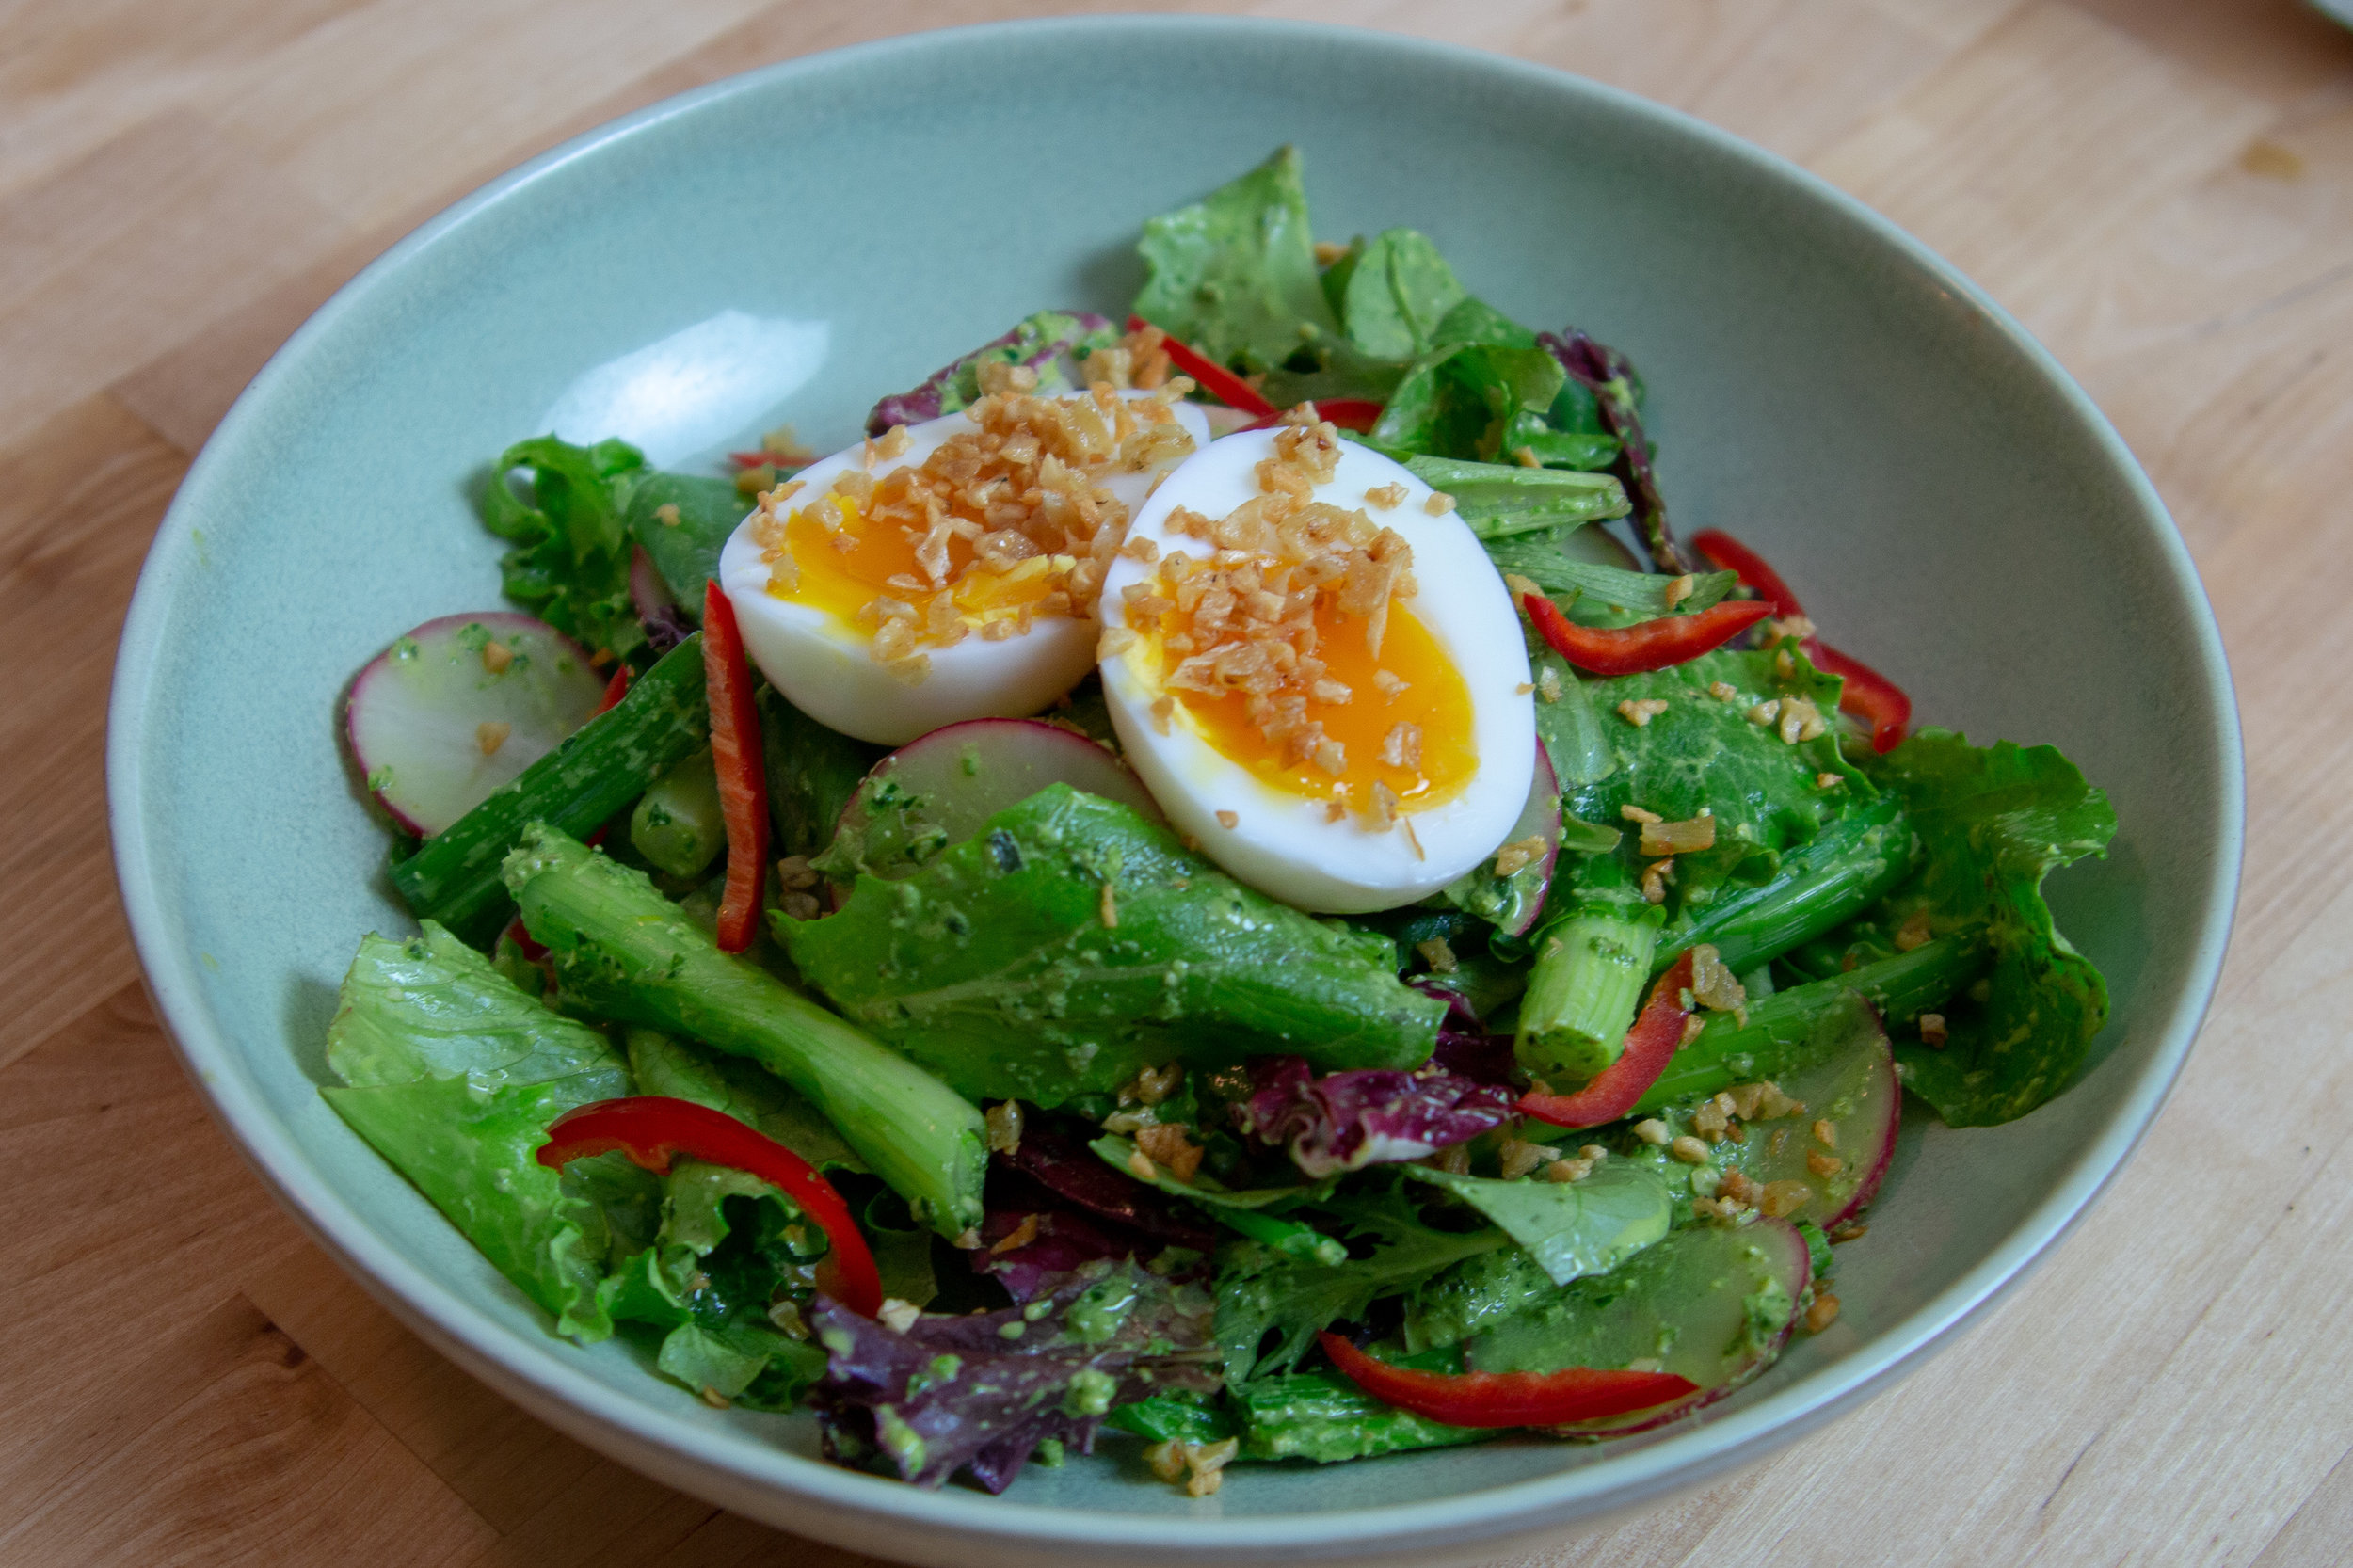  VIDEO: Warm snap pea salad with spinach walnut pesto and a 7 minute egg 